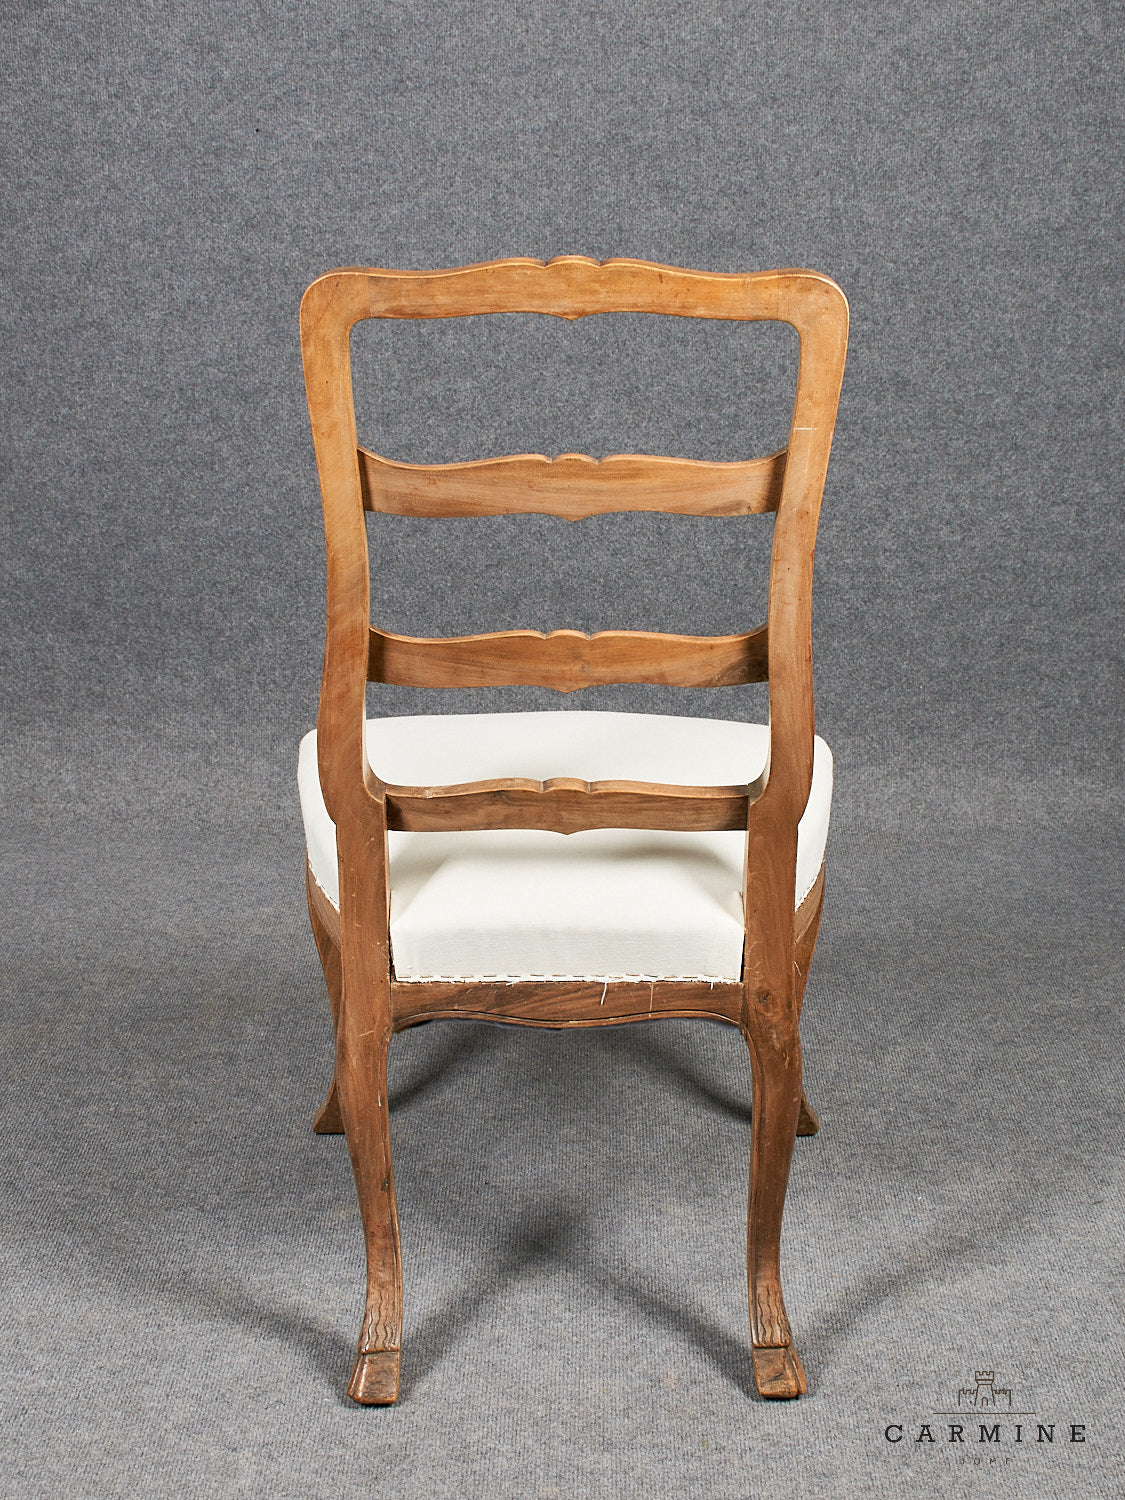 6 Bernese chairs, mid-18th century